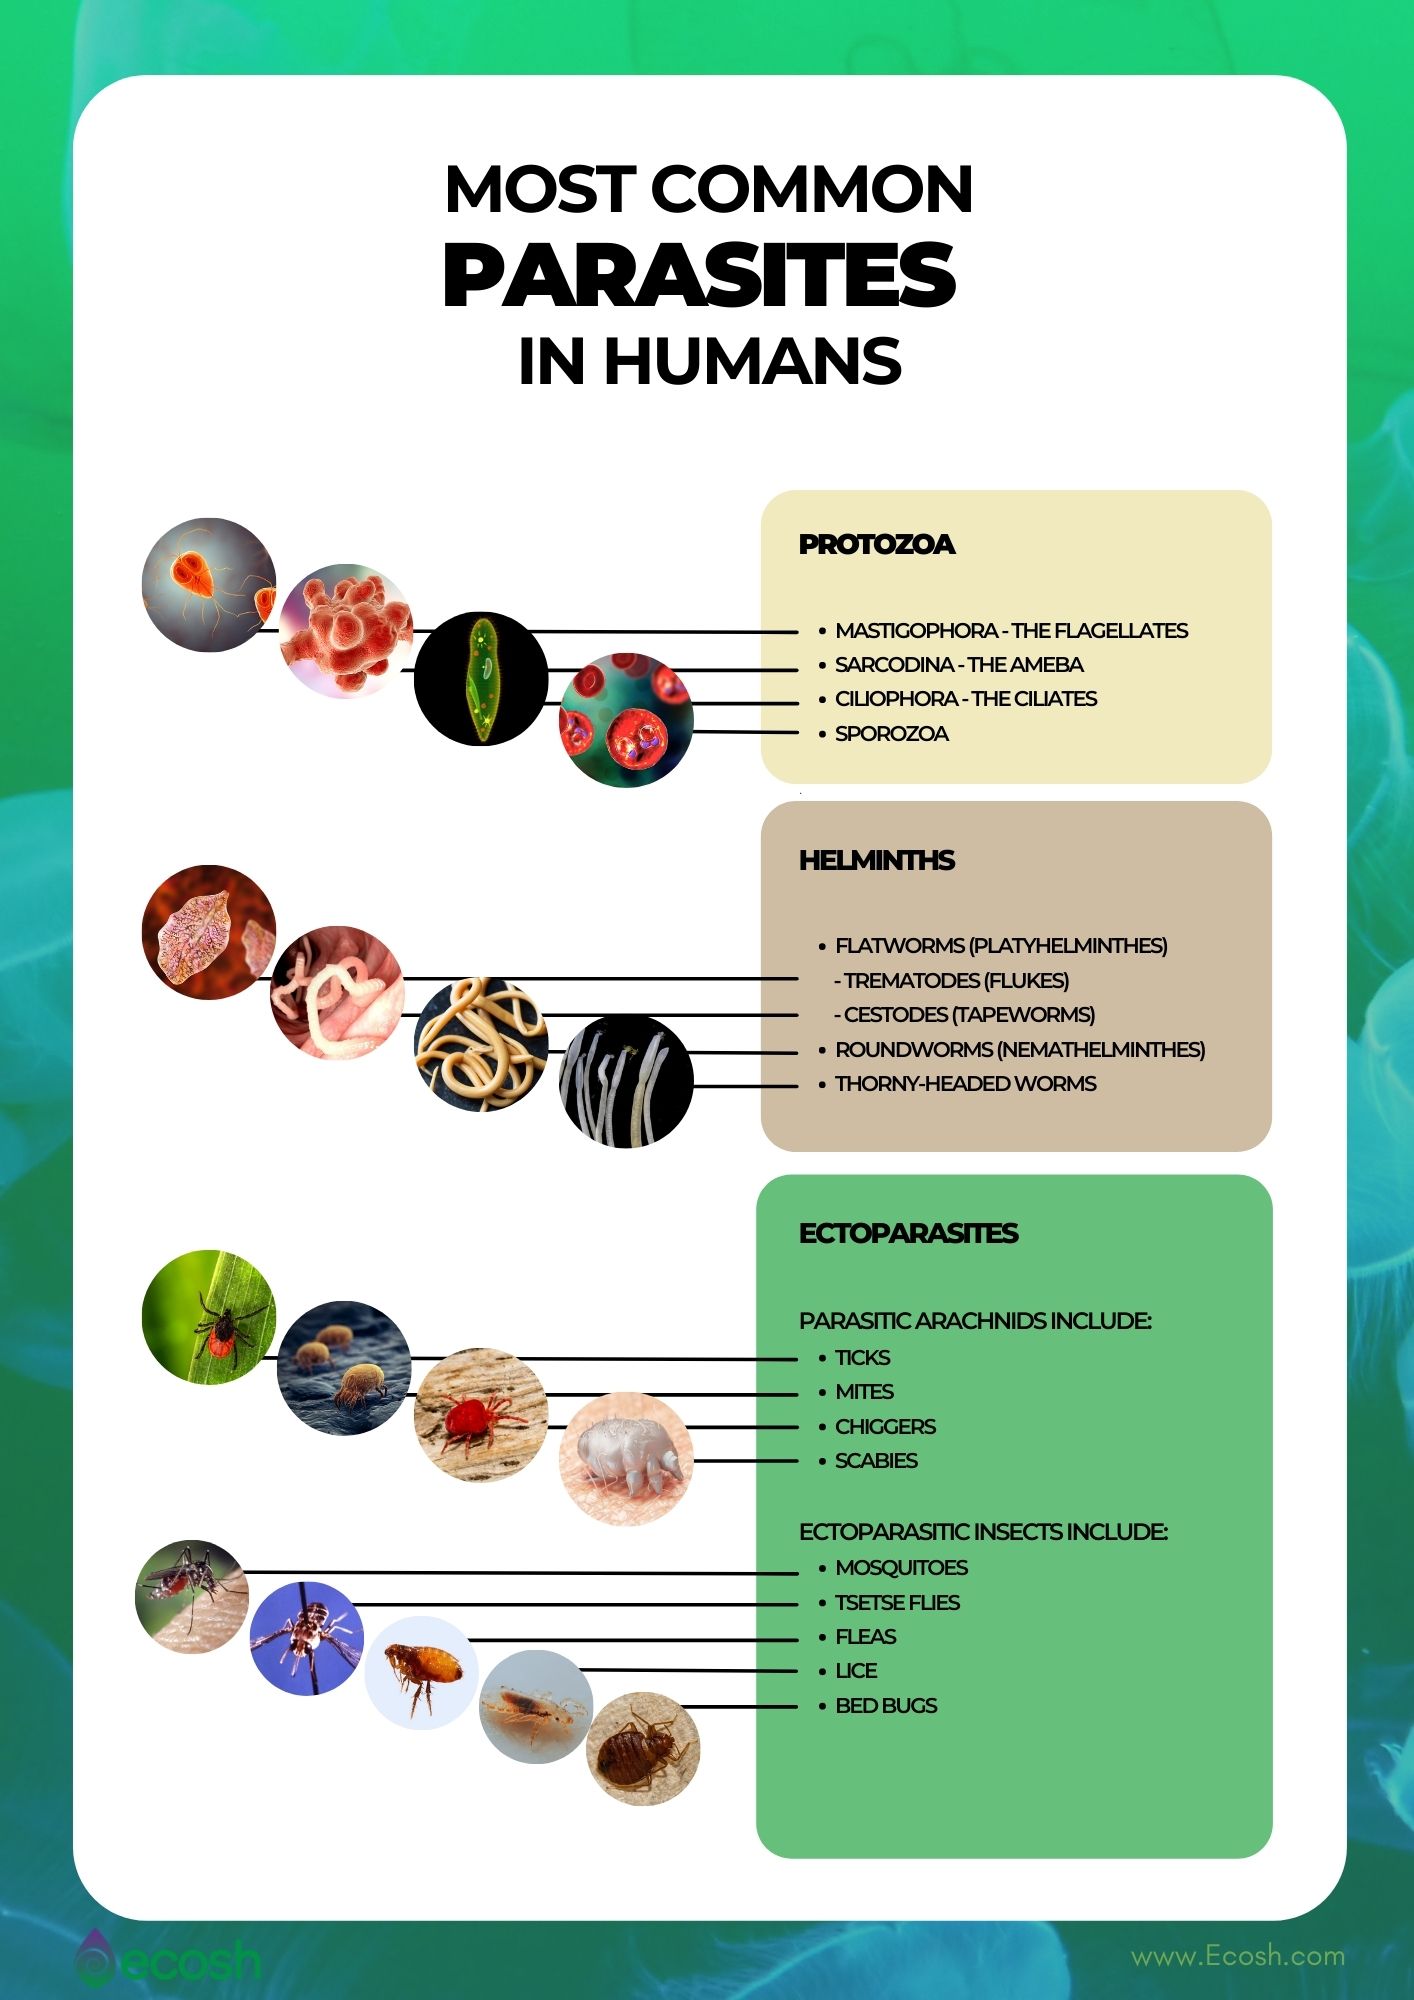 Most_Common_Parasites_In_Human_Body_Parasites_In_Humans_Where_do_Parasites_Live_In_Human_Body_Tapeworms_Flukes_Roundworms_Lice_Bed_Bugs_Amoebas_Protozoa_Helminths